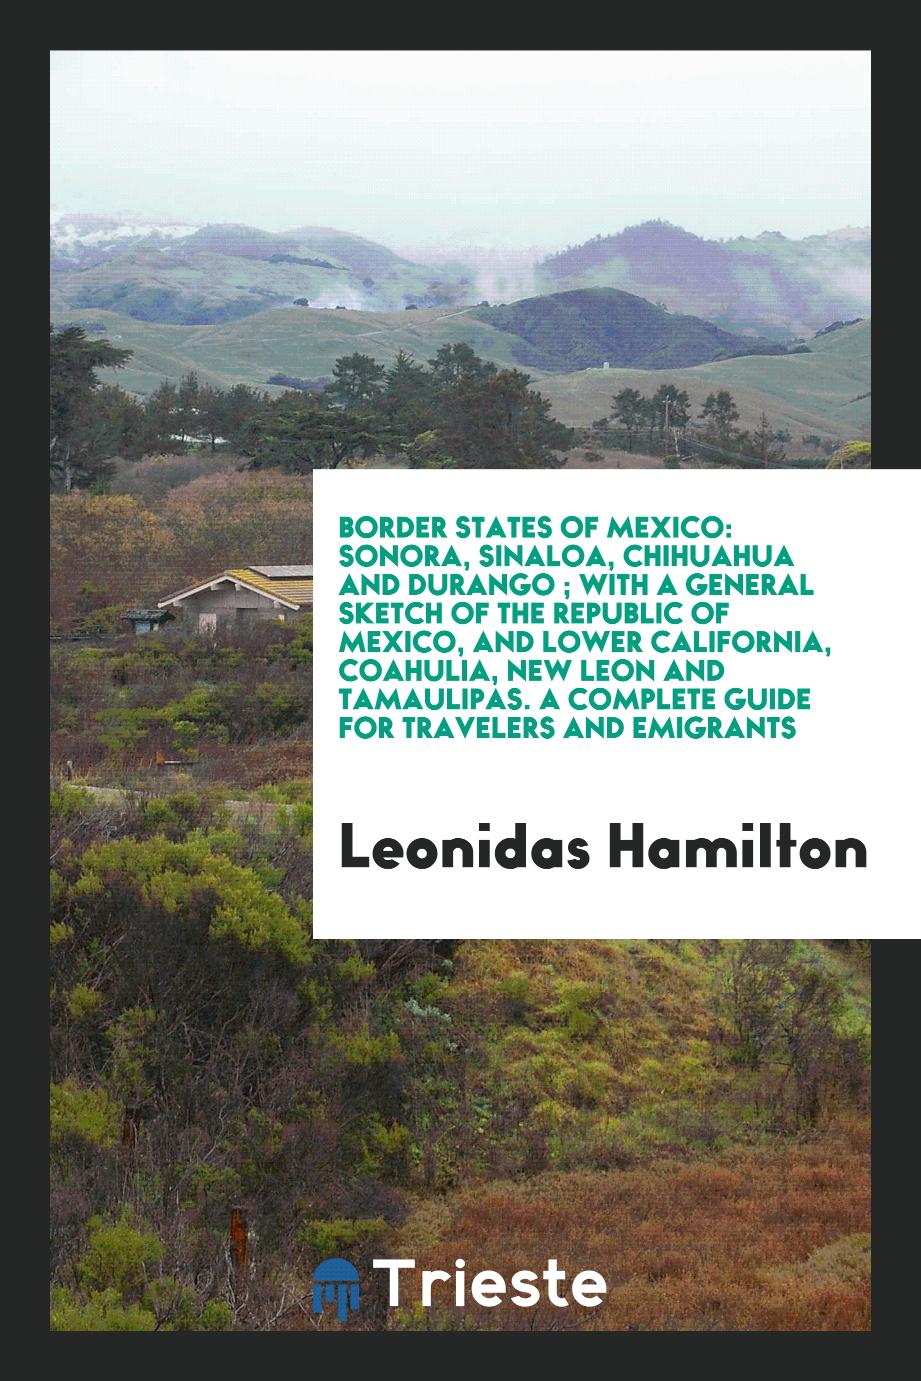 Border States of Mexico: Sonora, Sinaloa, Chihuahua and Durango ; With a General Sketch of the Republic of Mexico, and Lower California, Coahulia, New Leon and Tamaulipas. A Complete Guide for Travelers and Emigrants